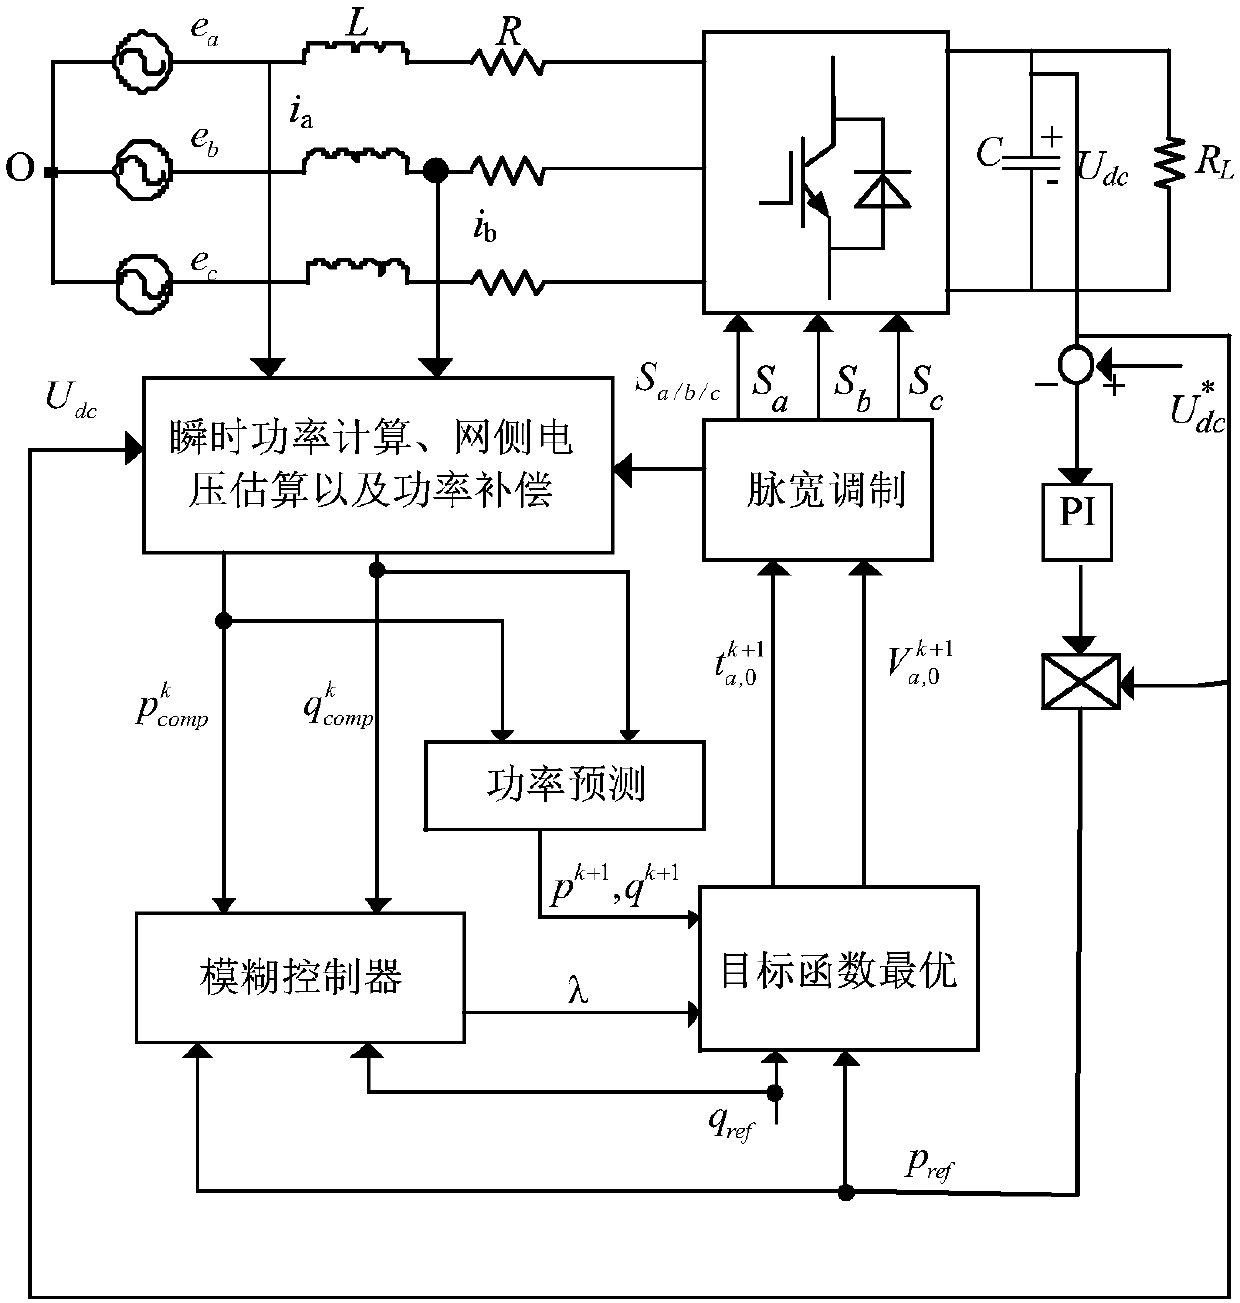 Model predictive direct power control method based on fuzzy control